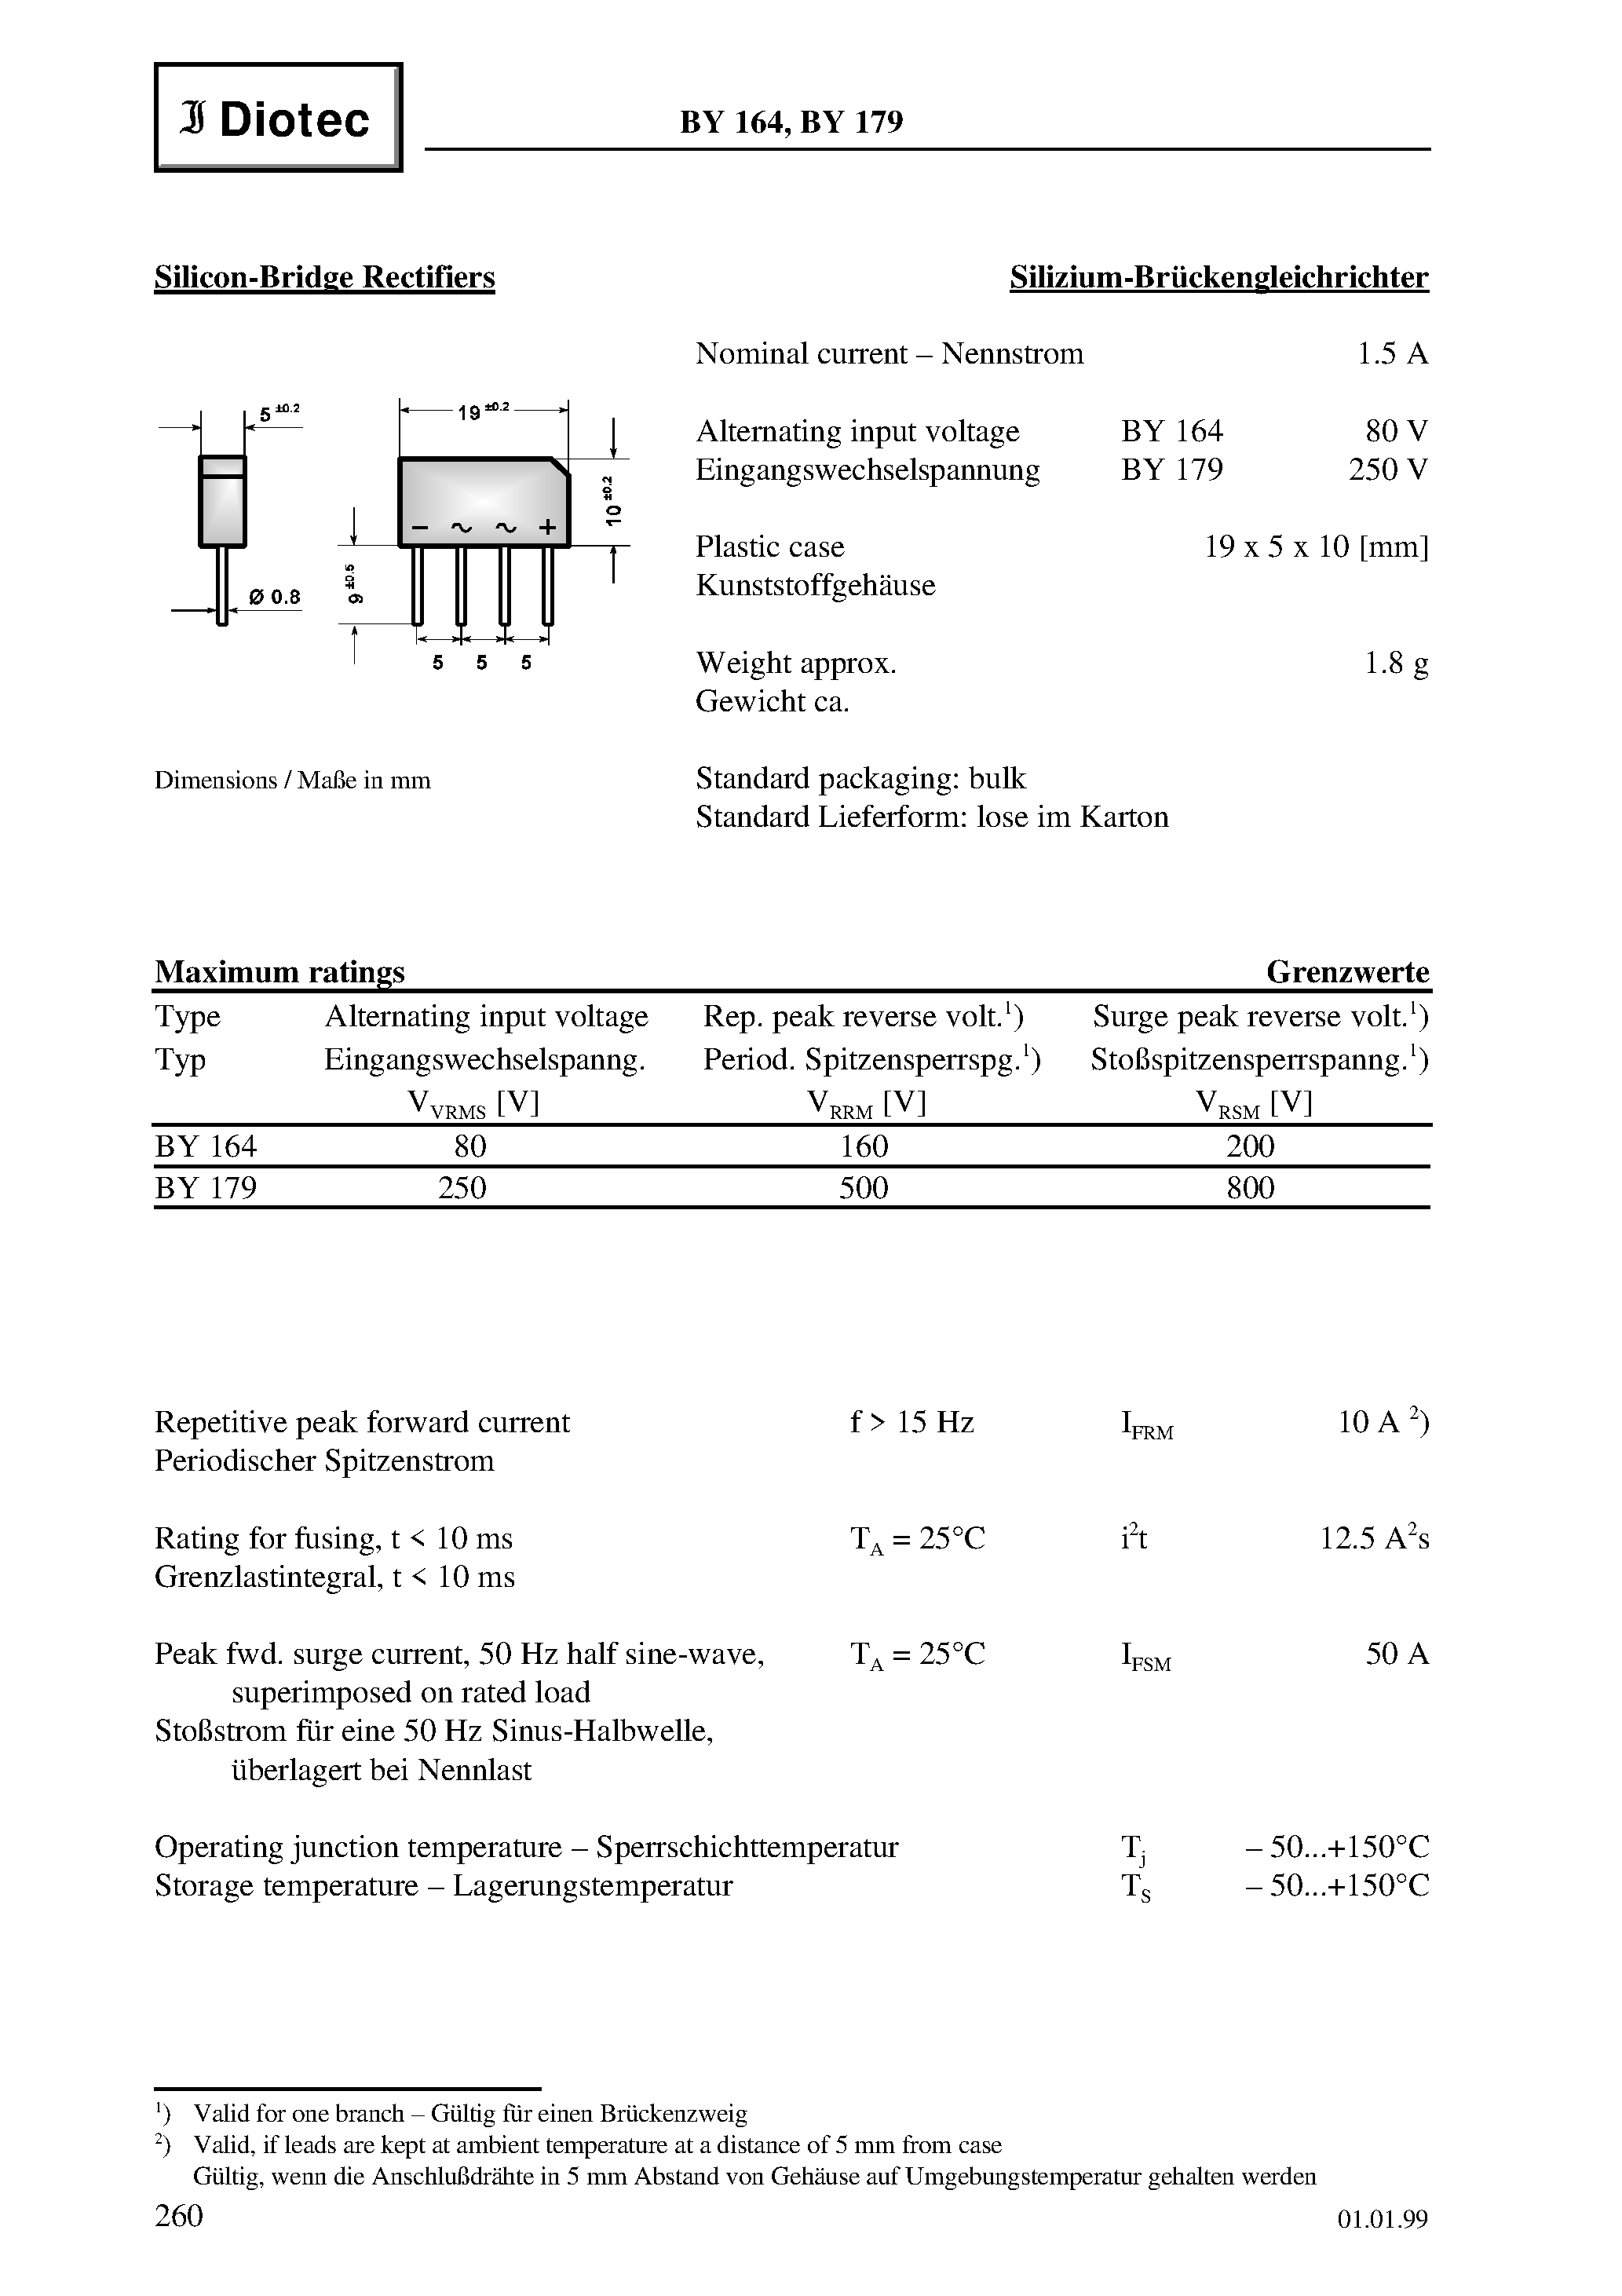 Datasheet BY179 - Silicon-Bridge Rectifiers page 1